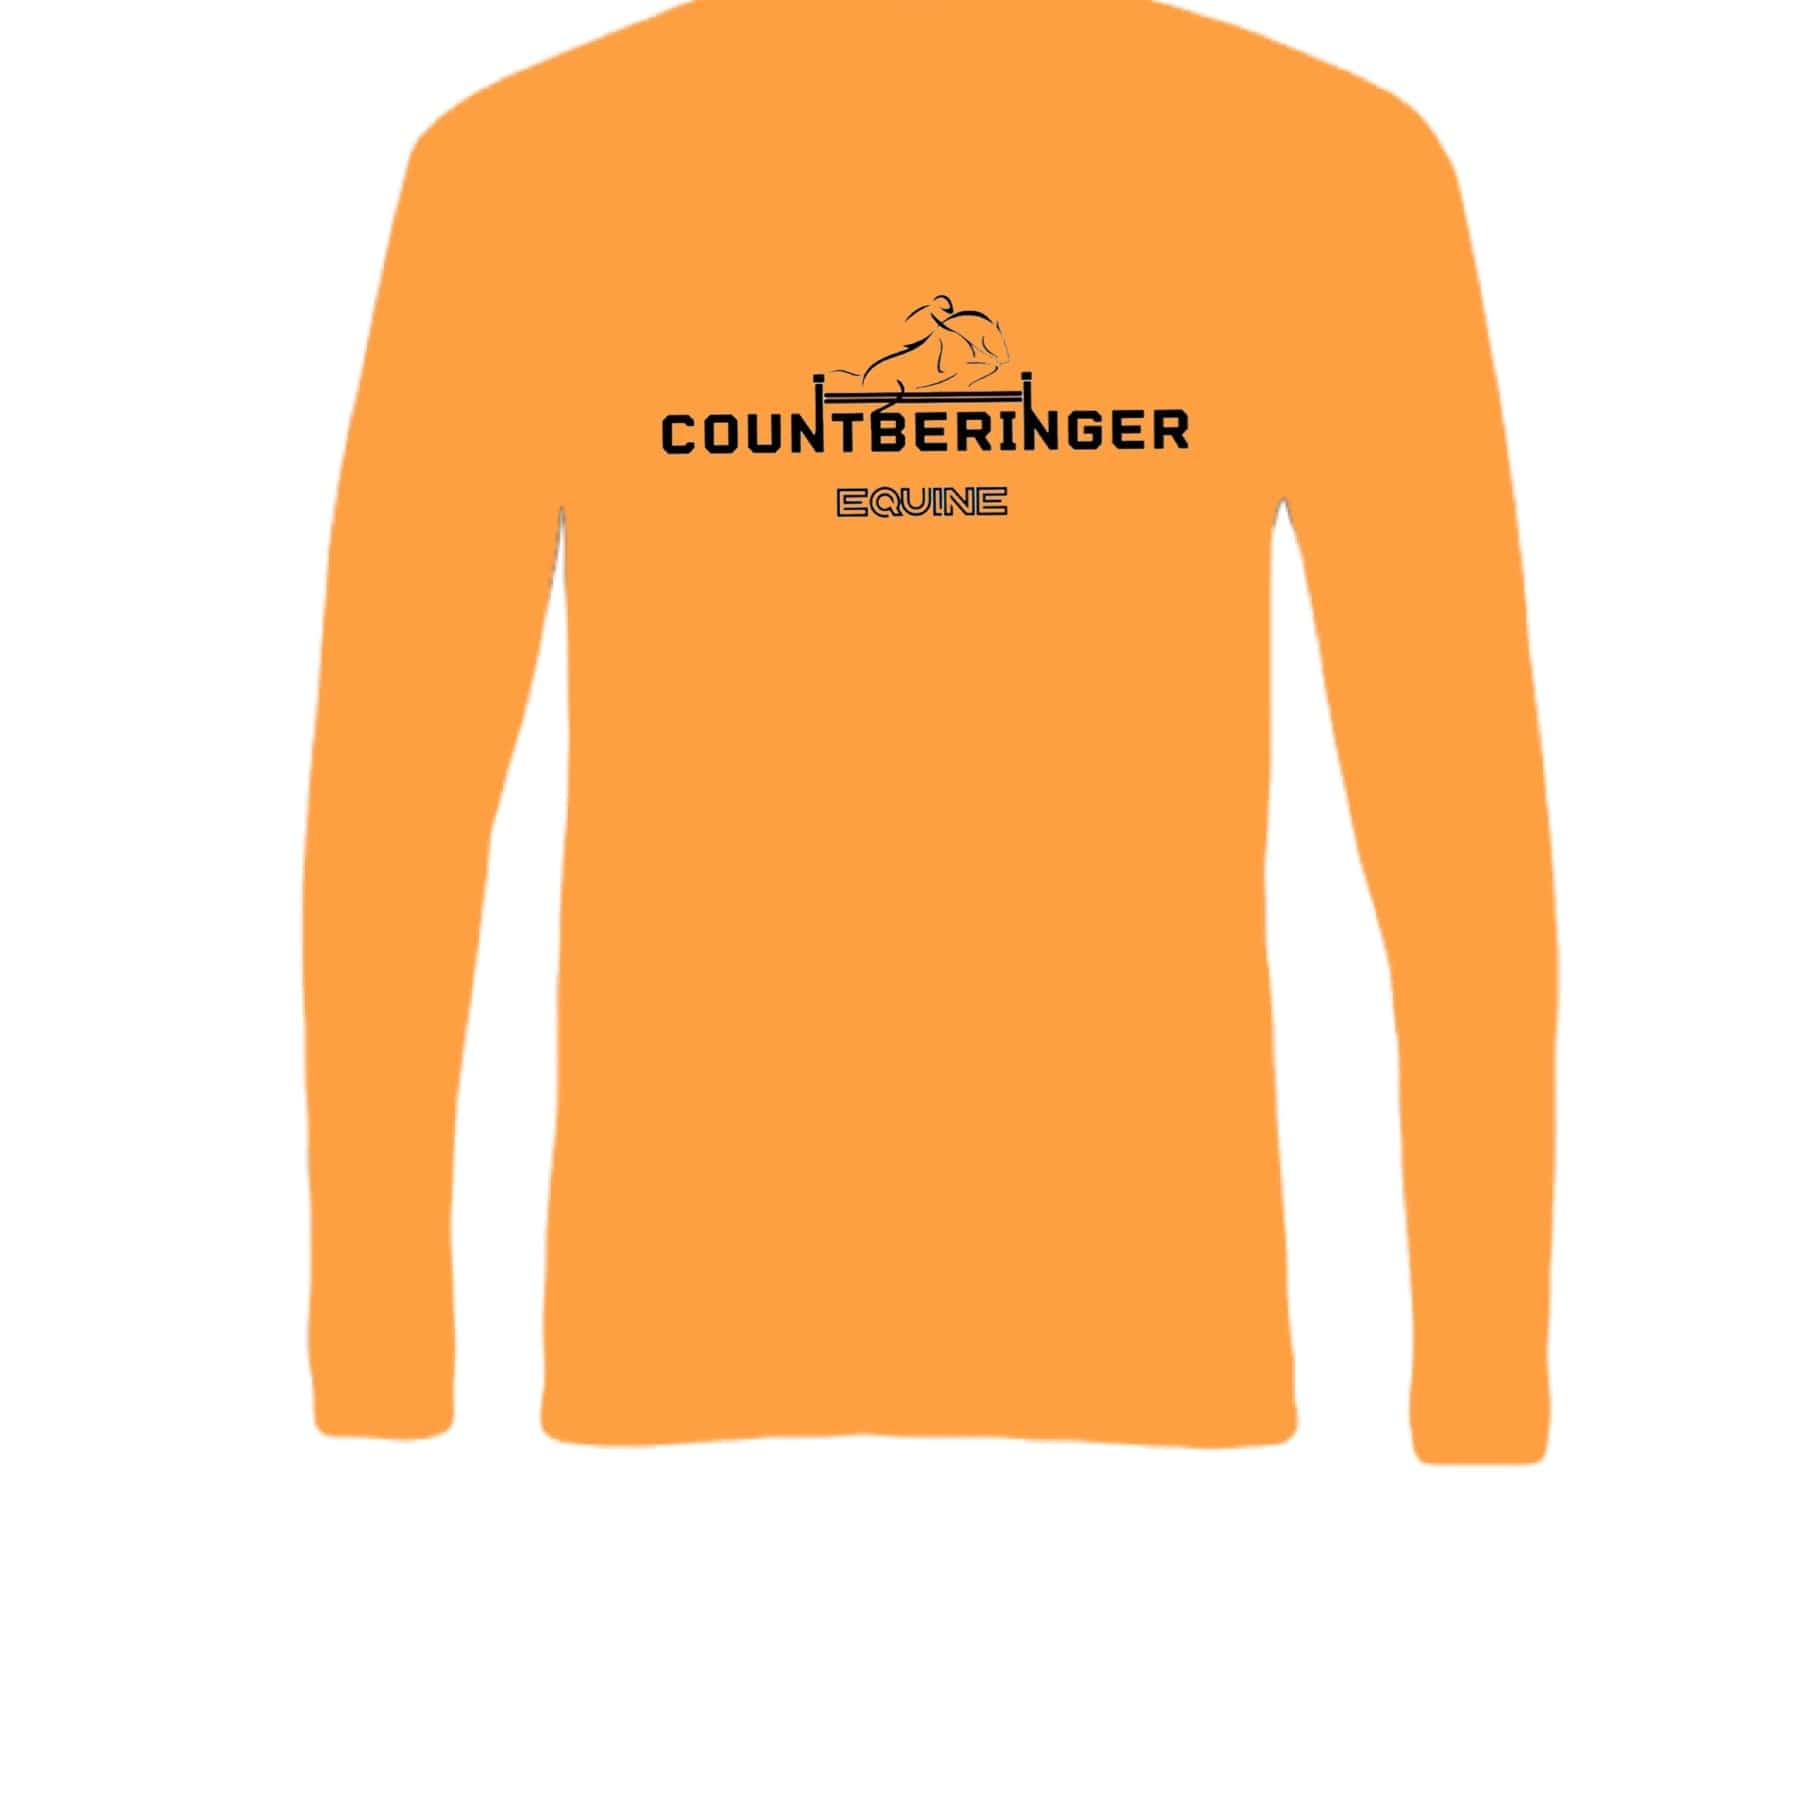 Equestrian Team Apparel Countberinger Equine Youth Sun Shirt equestrian team apparel online tack store mobile tack store custom farm apparel custom show stable clothing equestrian lifestyle horse show clothing riding clothes horses equestrian tack store